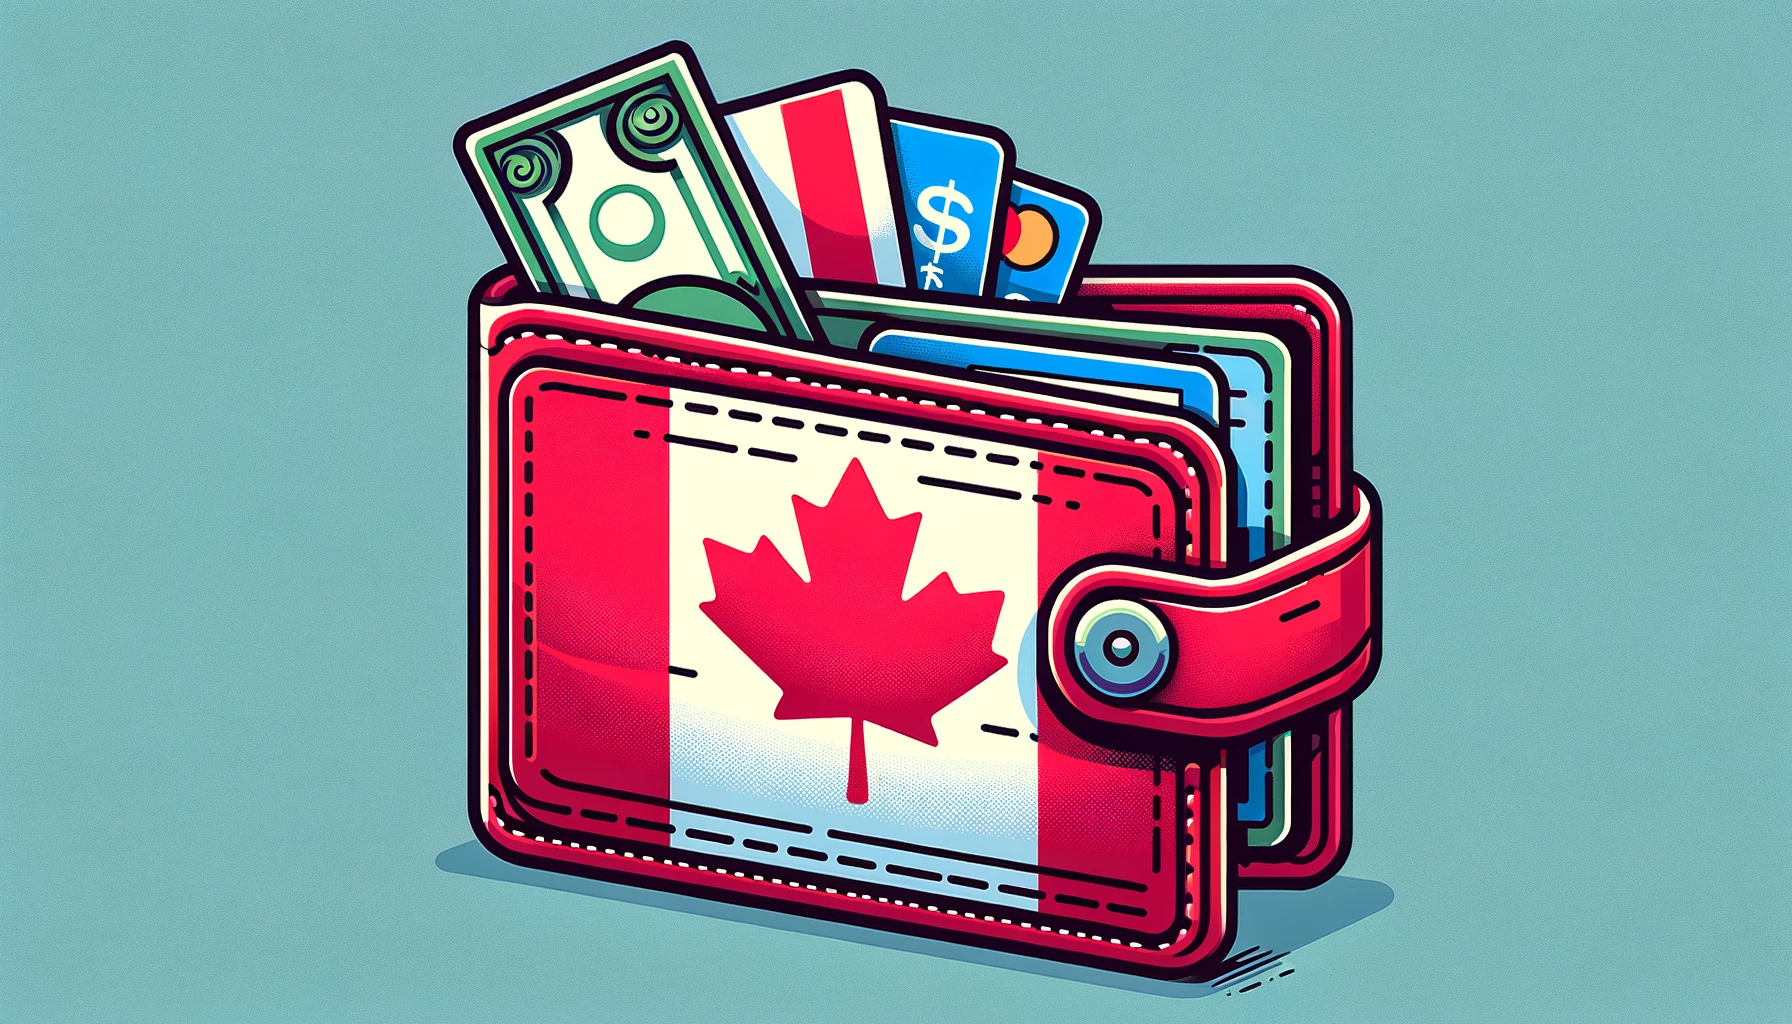 A Canadian flag inspired wallet containing credit cards and US dollar bills